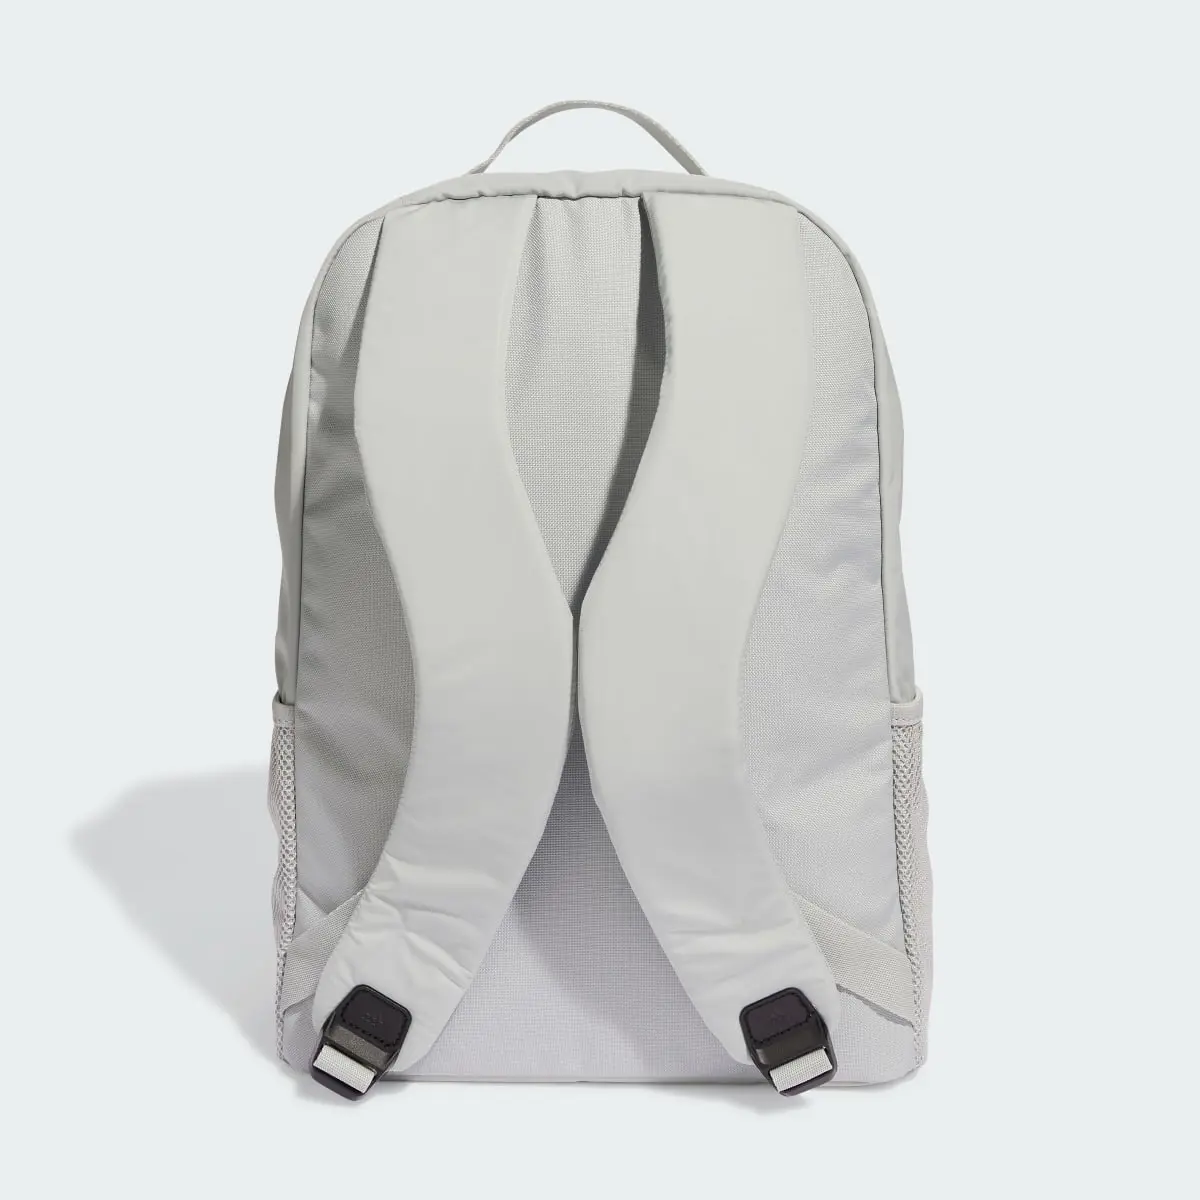 Adidas Sport Padded Backpack. 3